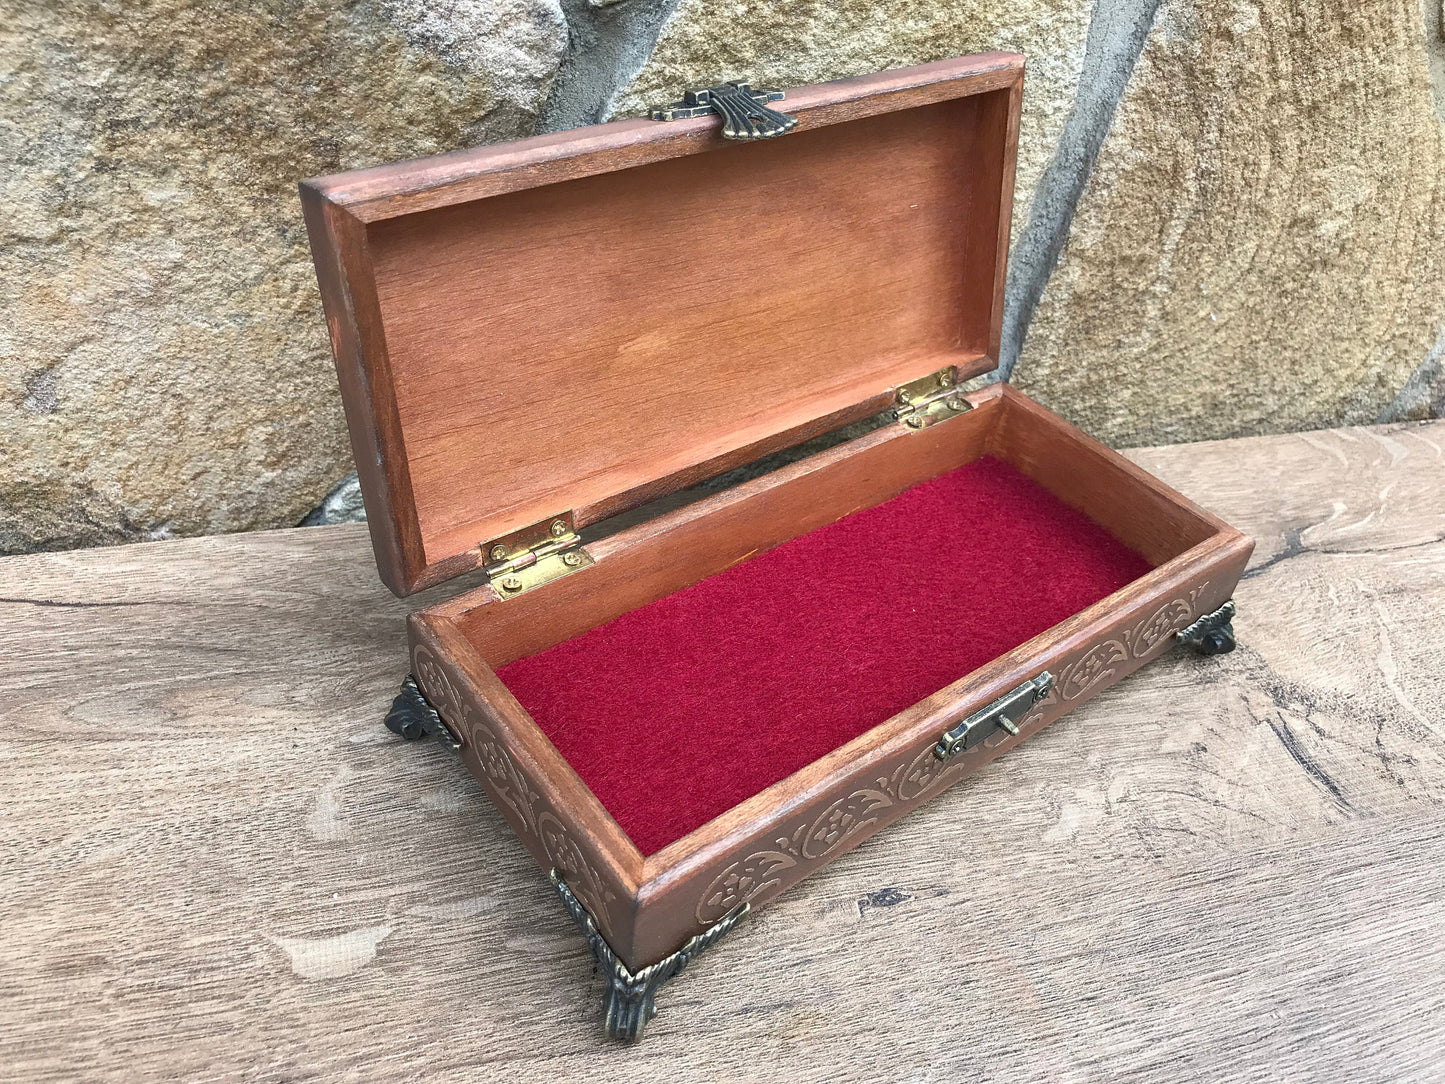 5th anniversary, jewelry box, wooden gift for her, jewelry storage, wooden anniversary, jewelry casket, treasure chest, vintage casket